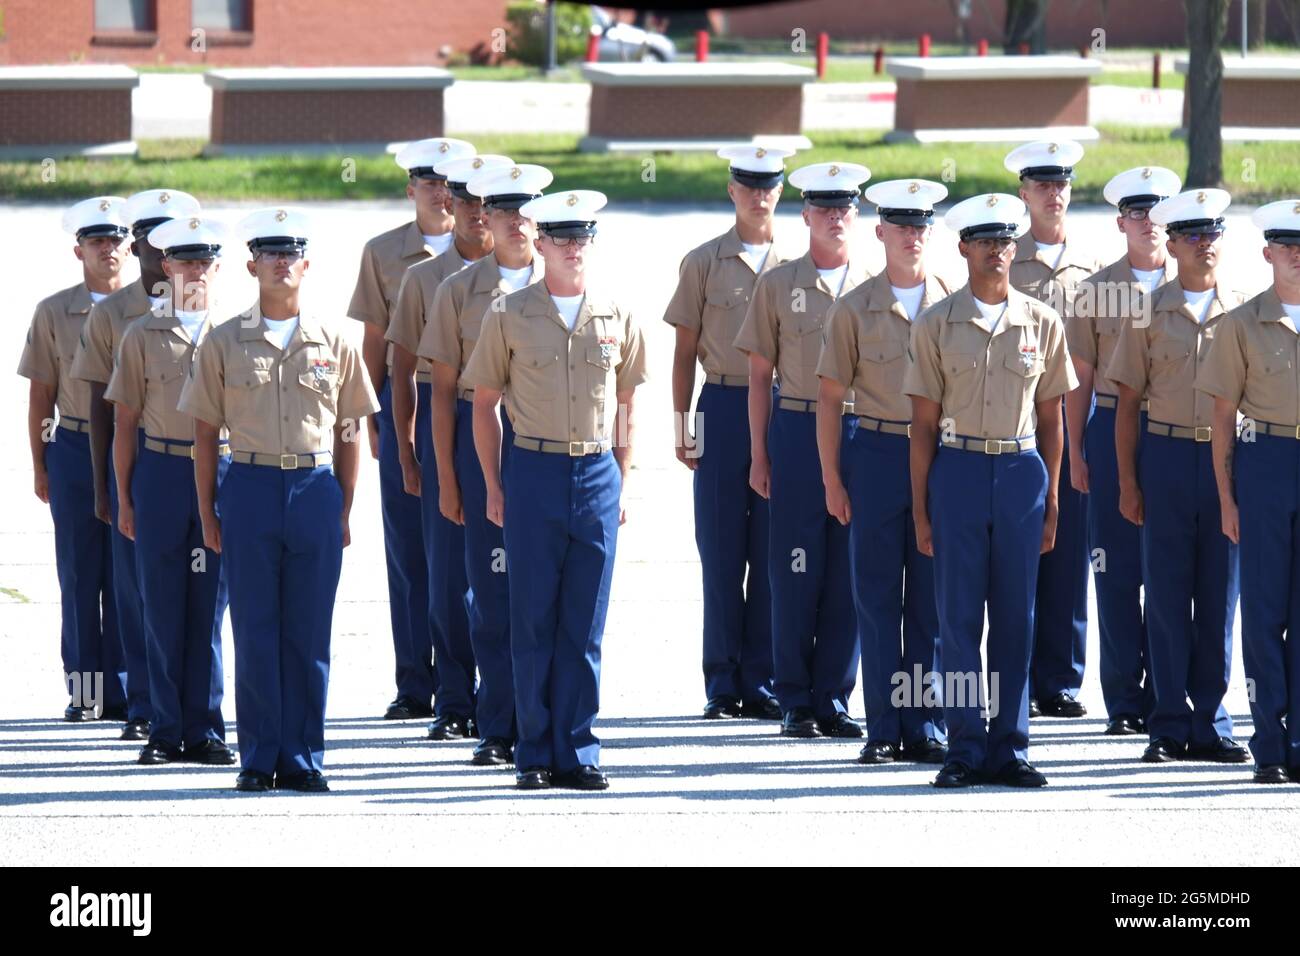 US Marines in formation during graduation ceremony, Parris Island, South Carolina Stock Photo